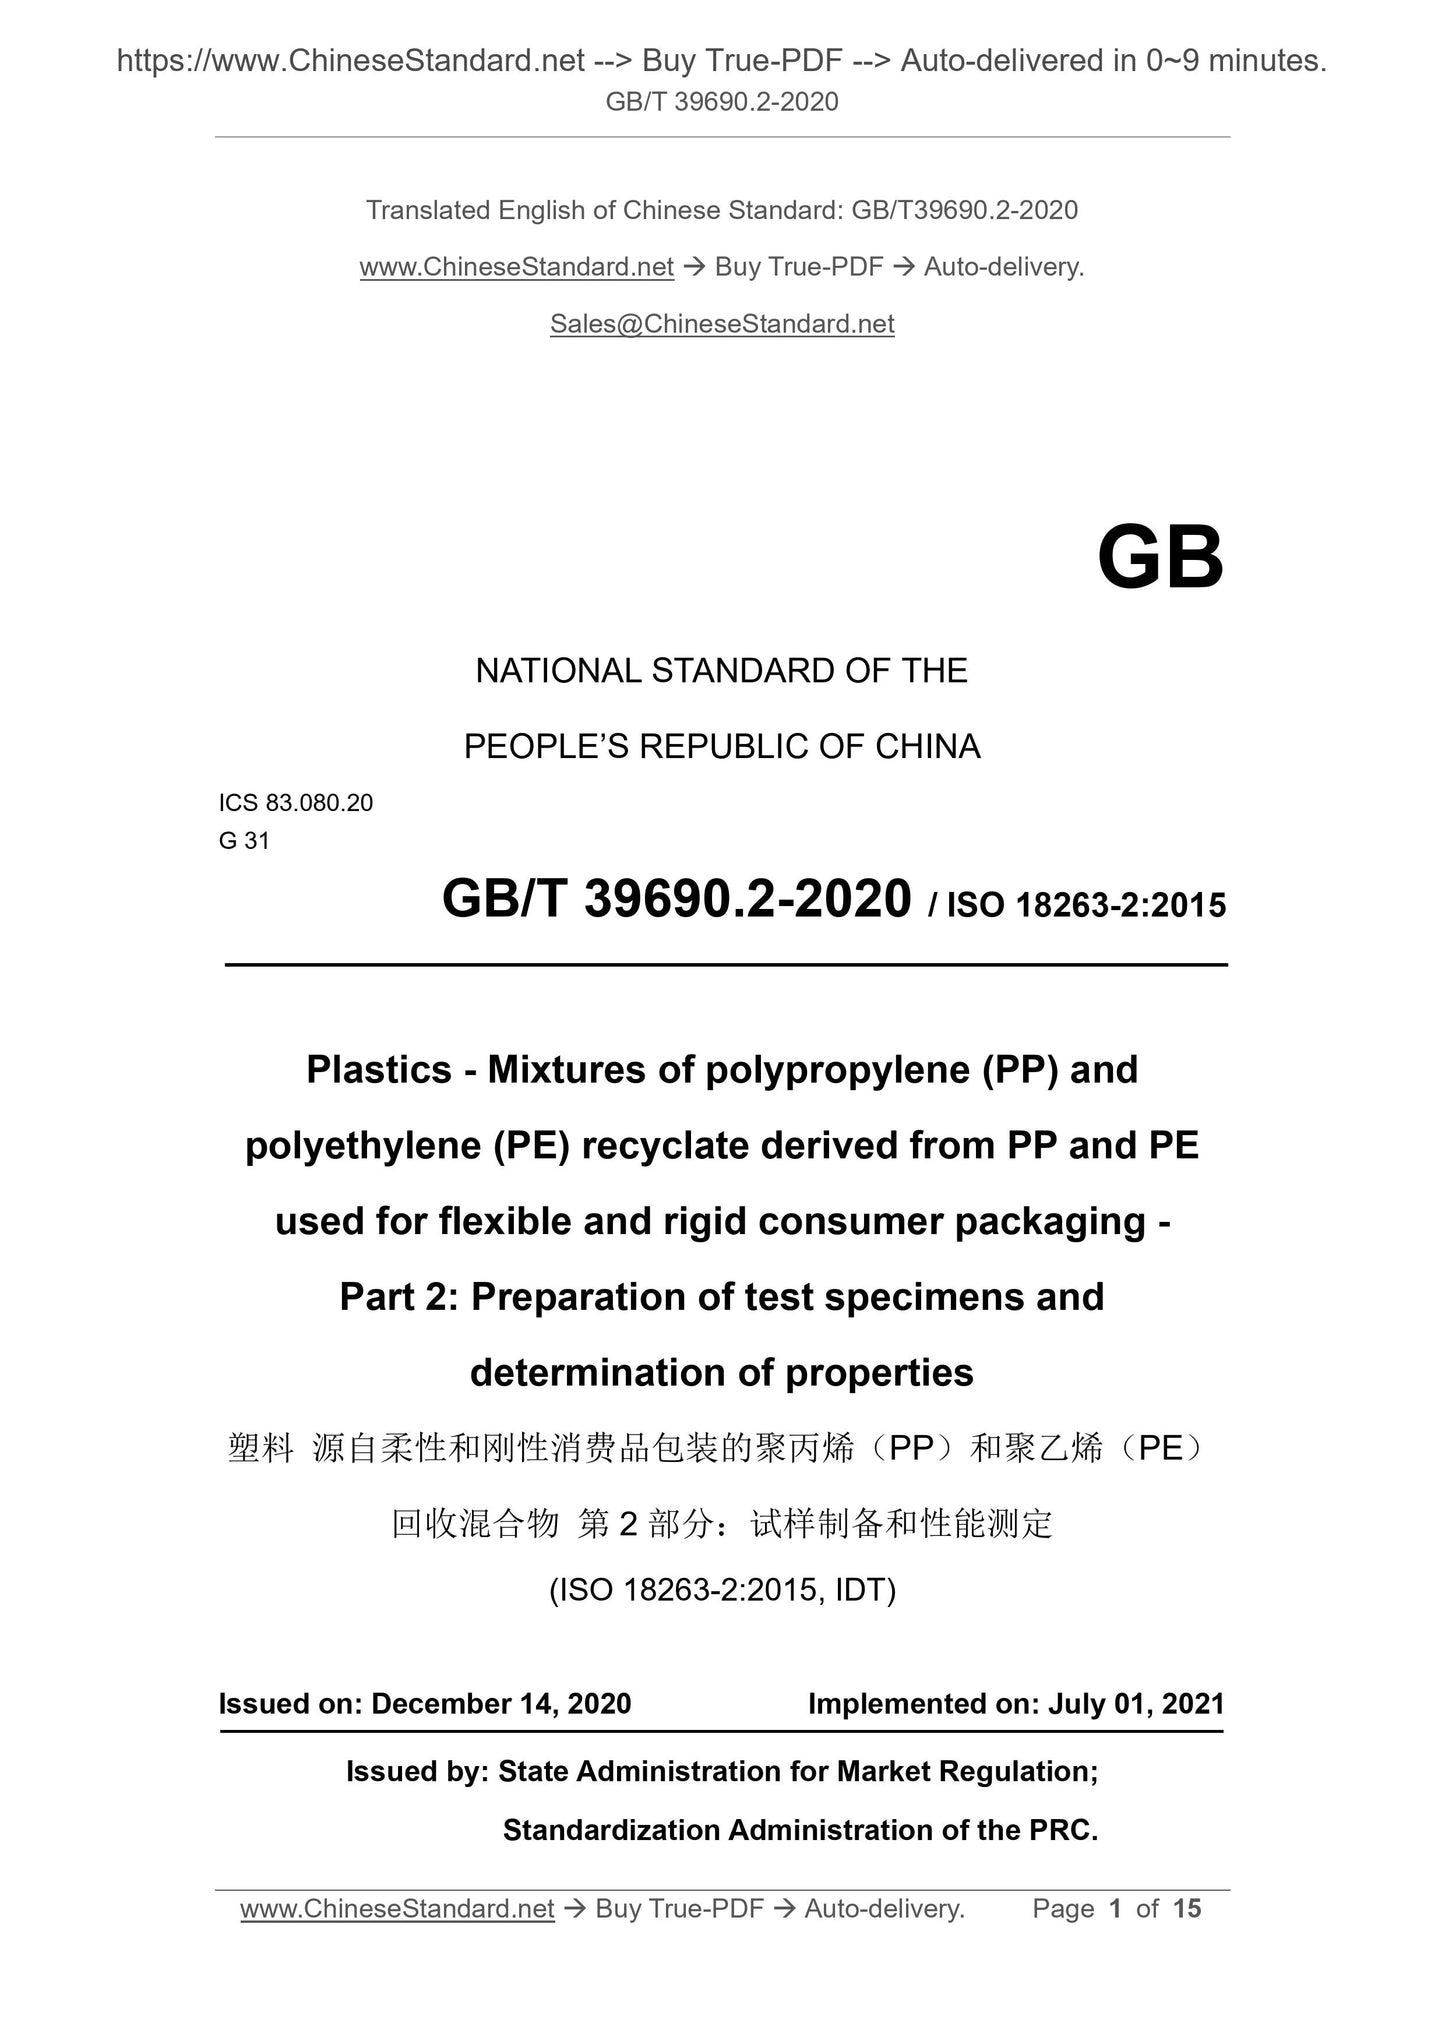 GB/T 39690.2-2020 Page 1